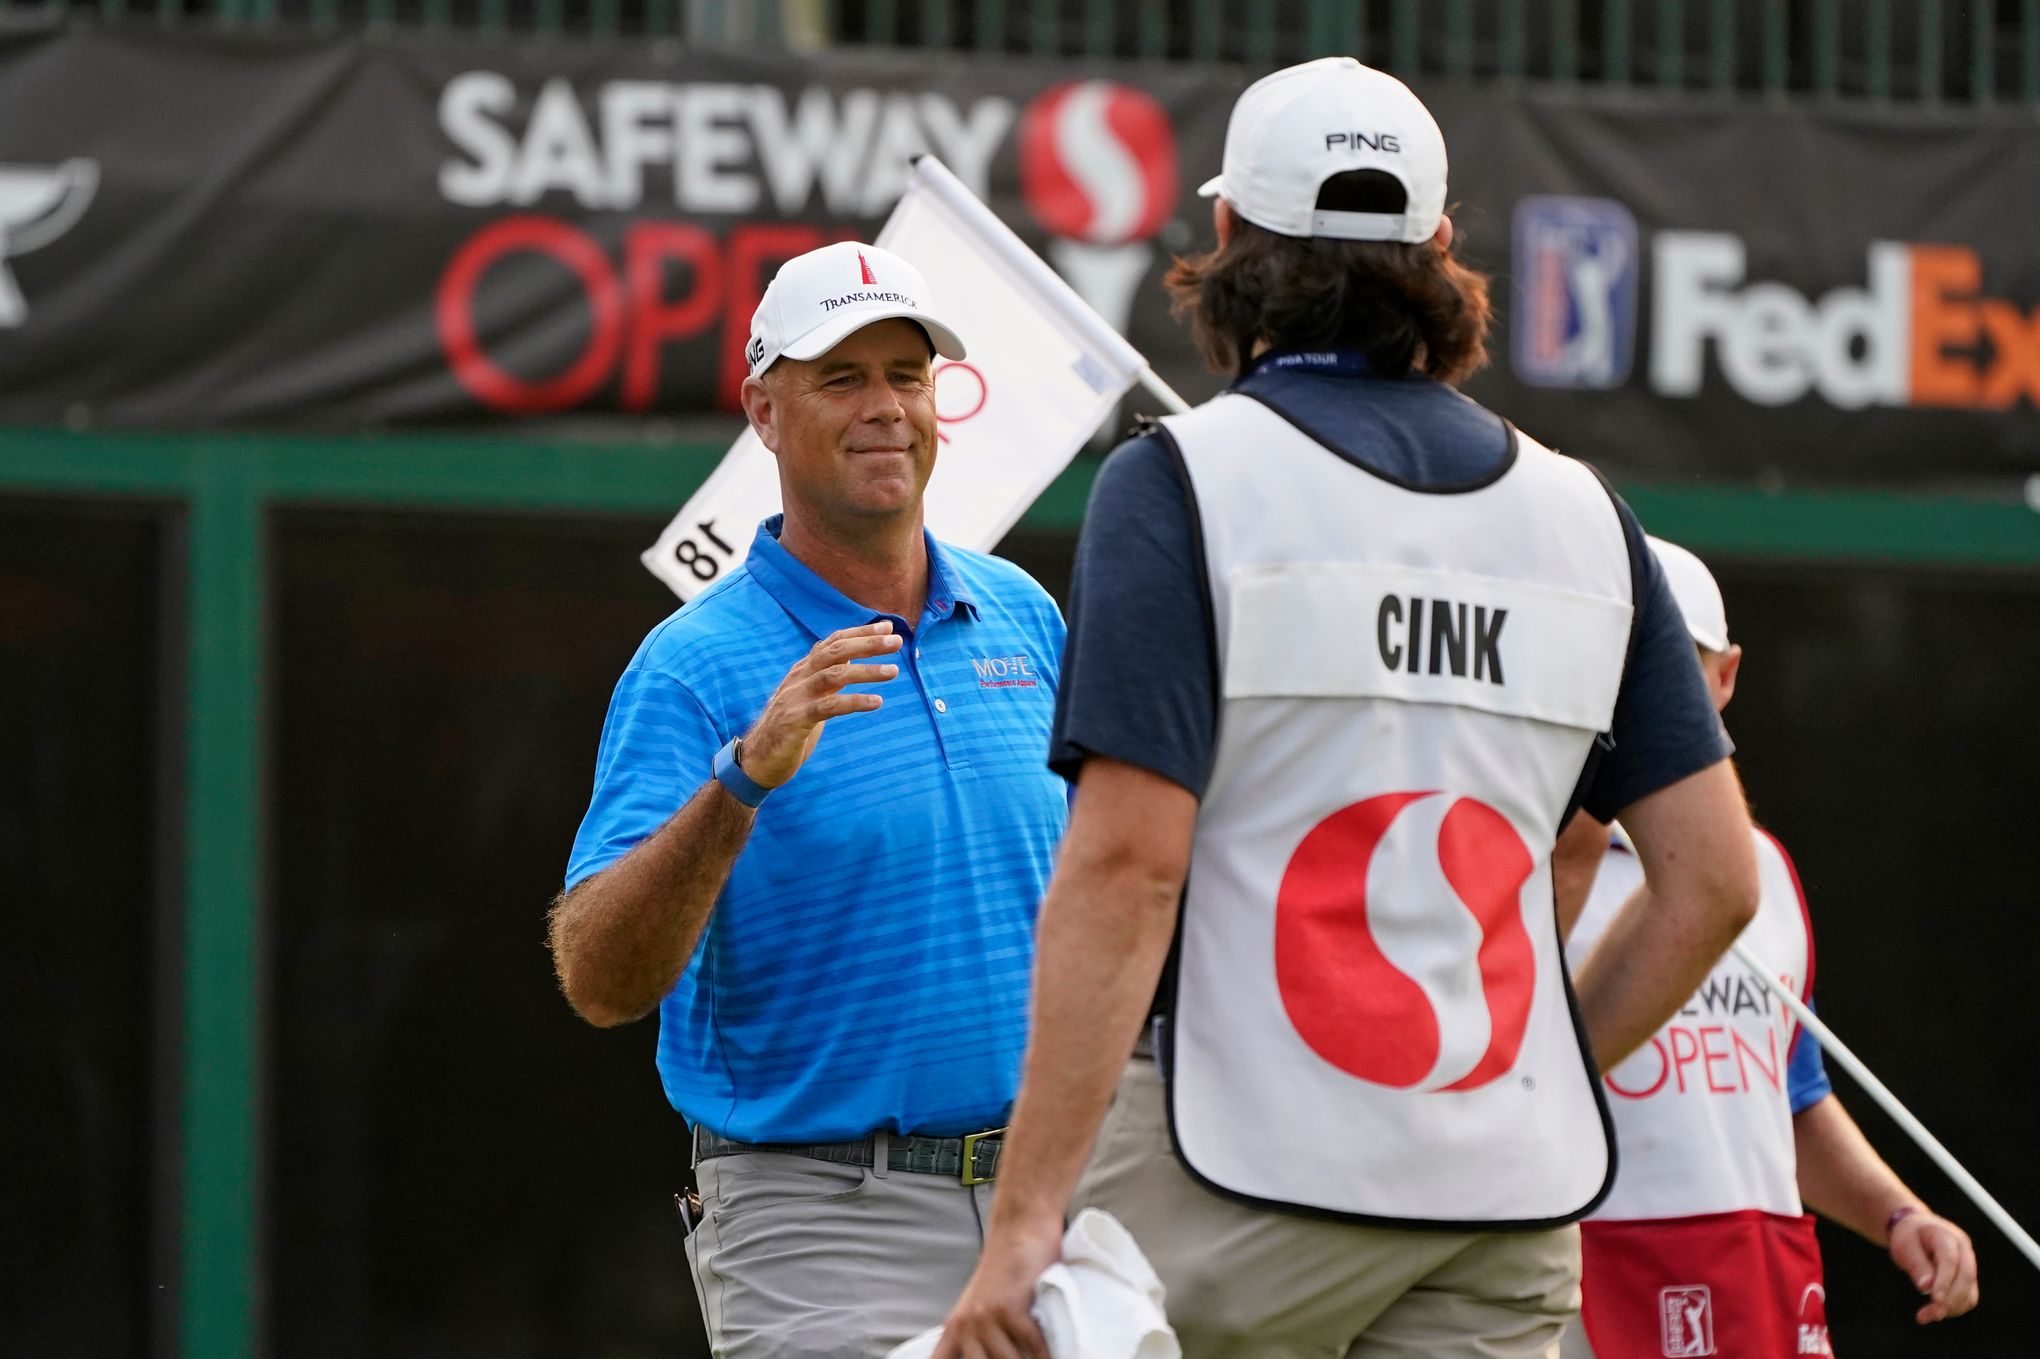 Stewart Cink playing well with wife, Lisa, working as his caddie